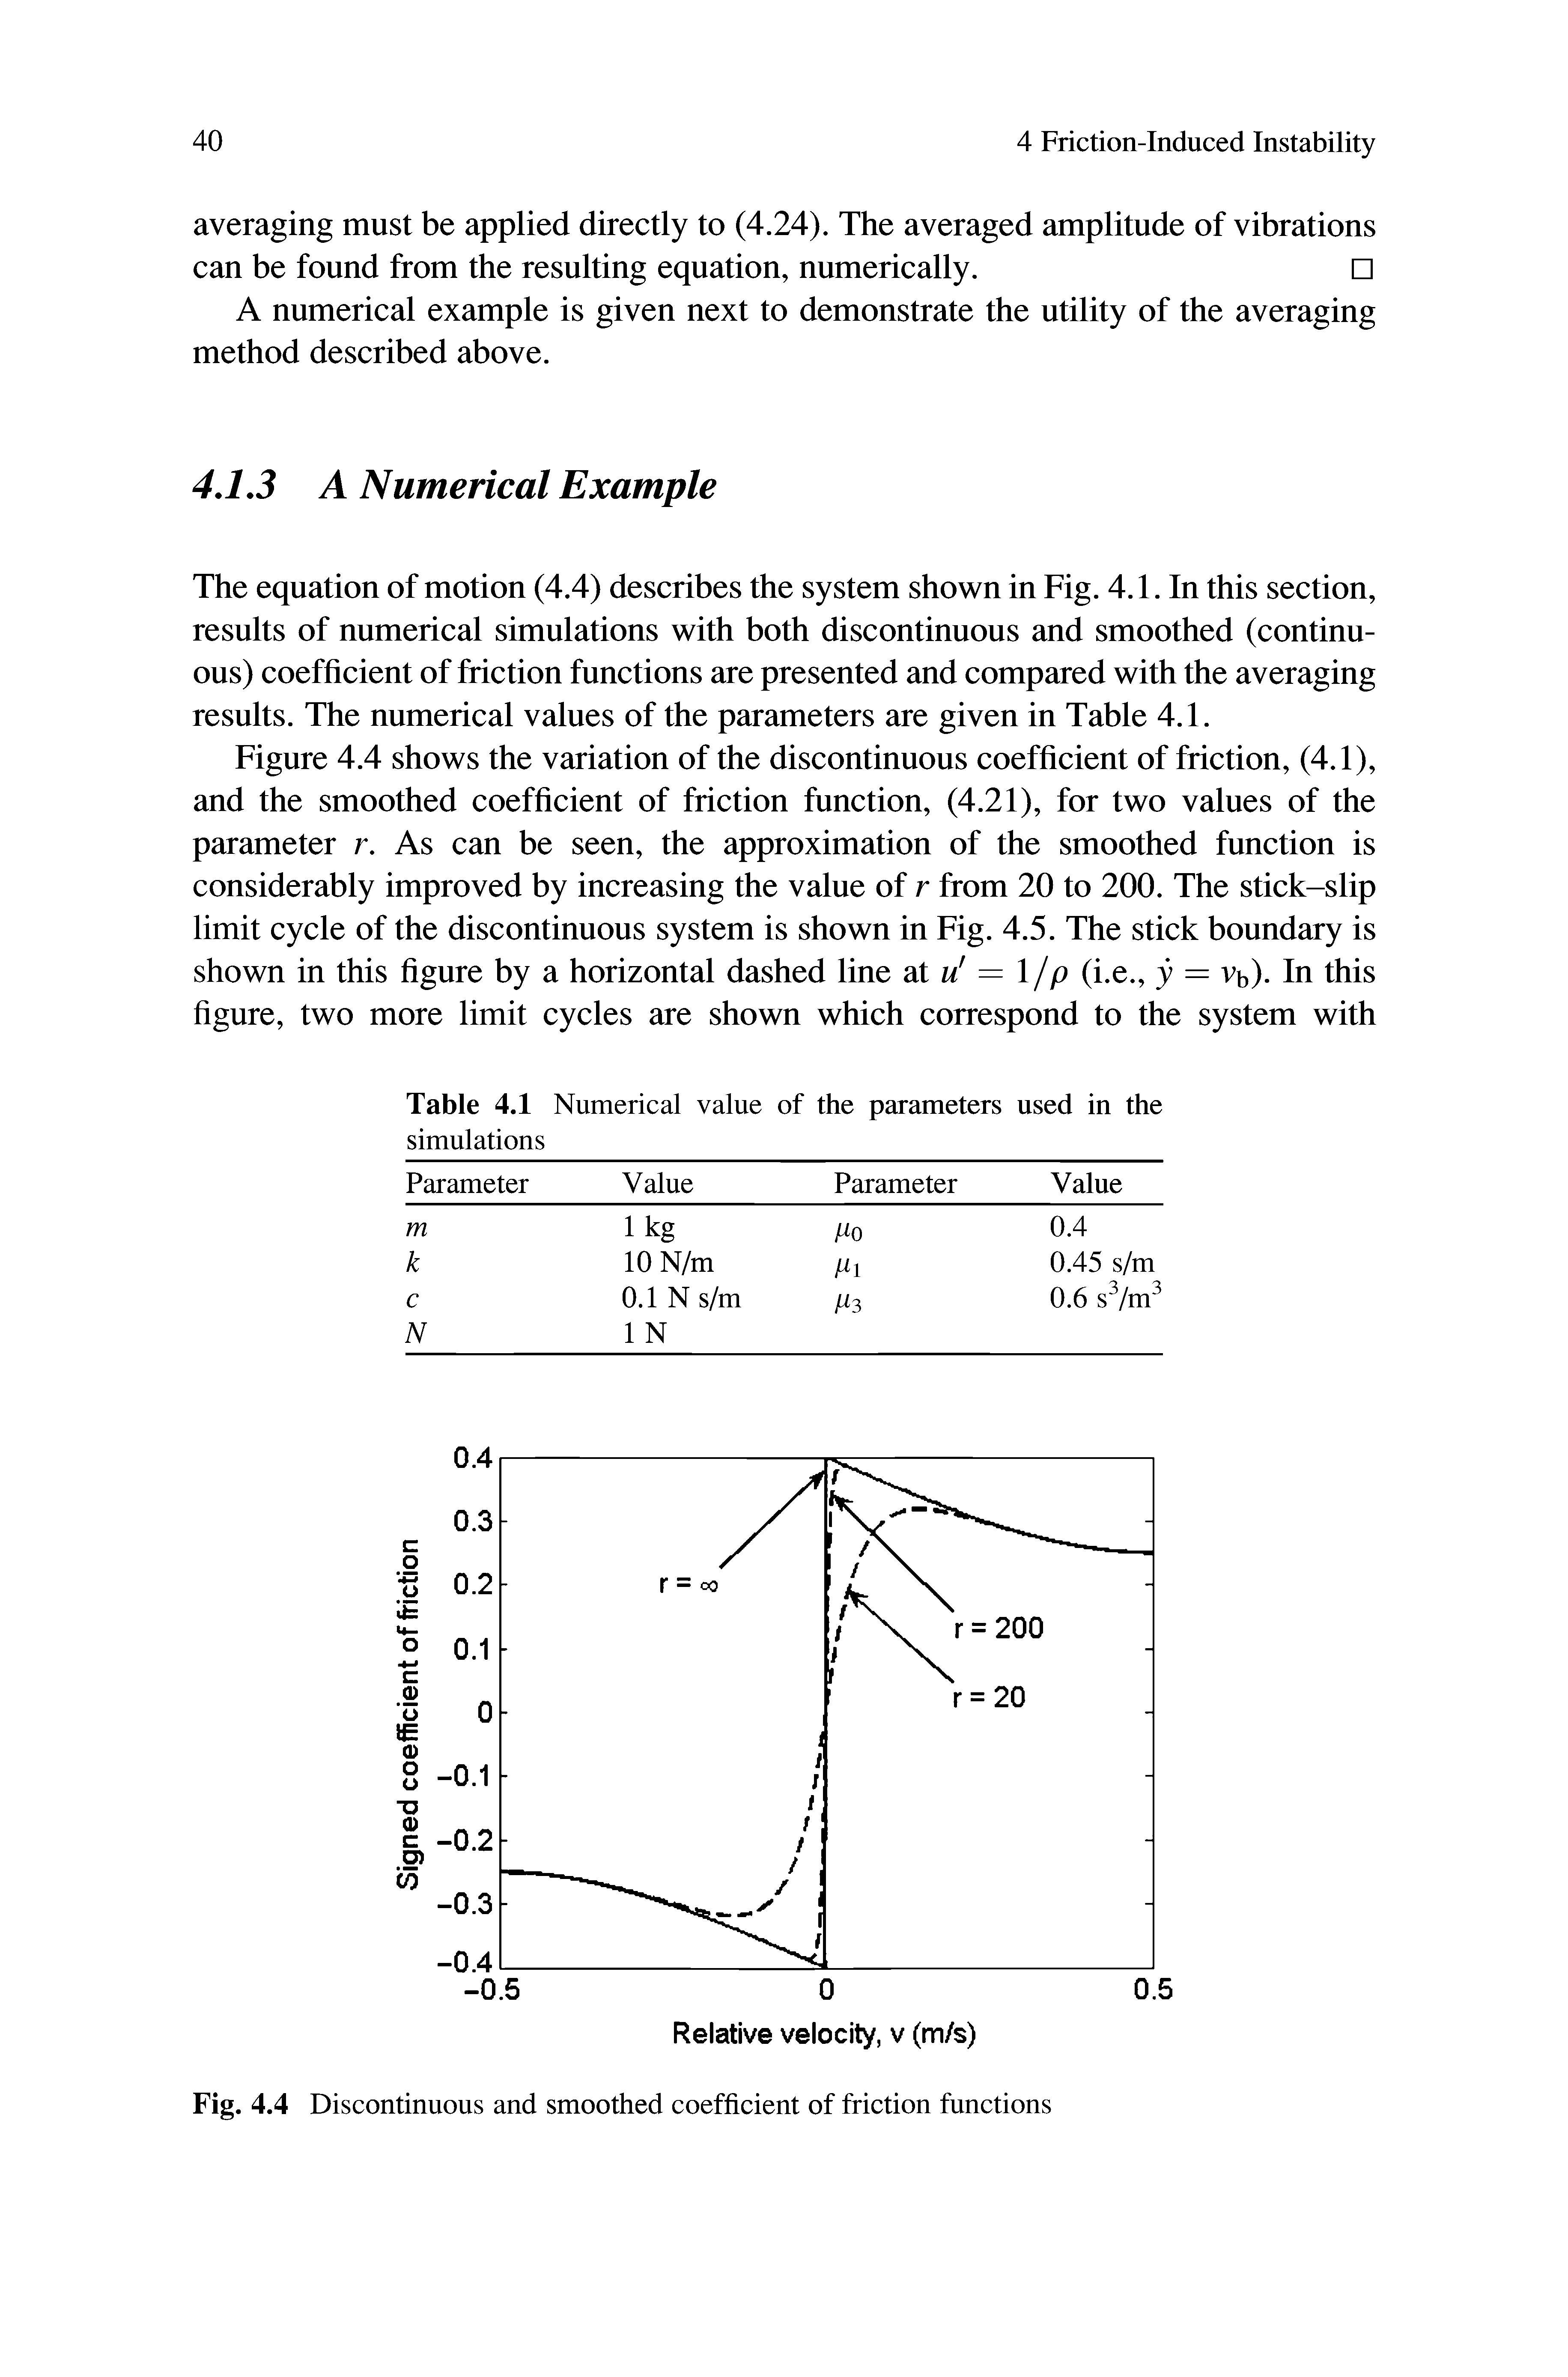 Figure 4.4 shows the variation of the discontinuous coefficient of friction, (4.1), and the smoothed coefficient of friction function, (4.21), for two values of the parameter r. As can be seen, the approximation of the smoothed function is considerably improved by increasing the value of r from 20 to 200. The stick-slip limit cycle of the discontinuous system is shown in Fig. 4.5. The stick boundary is shown in this figure by a horizontal dashed line at m = 1 /p (i.e., y = Vb). In this figure, two more limit cycles are shown which correspond to the system with...